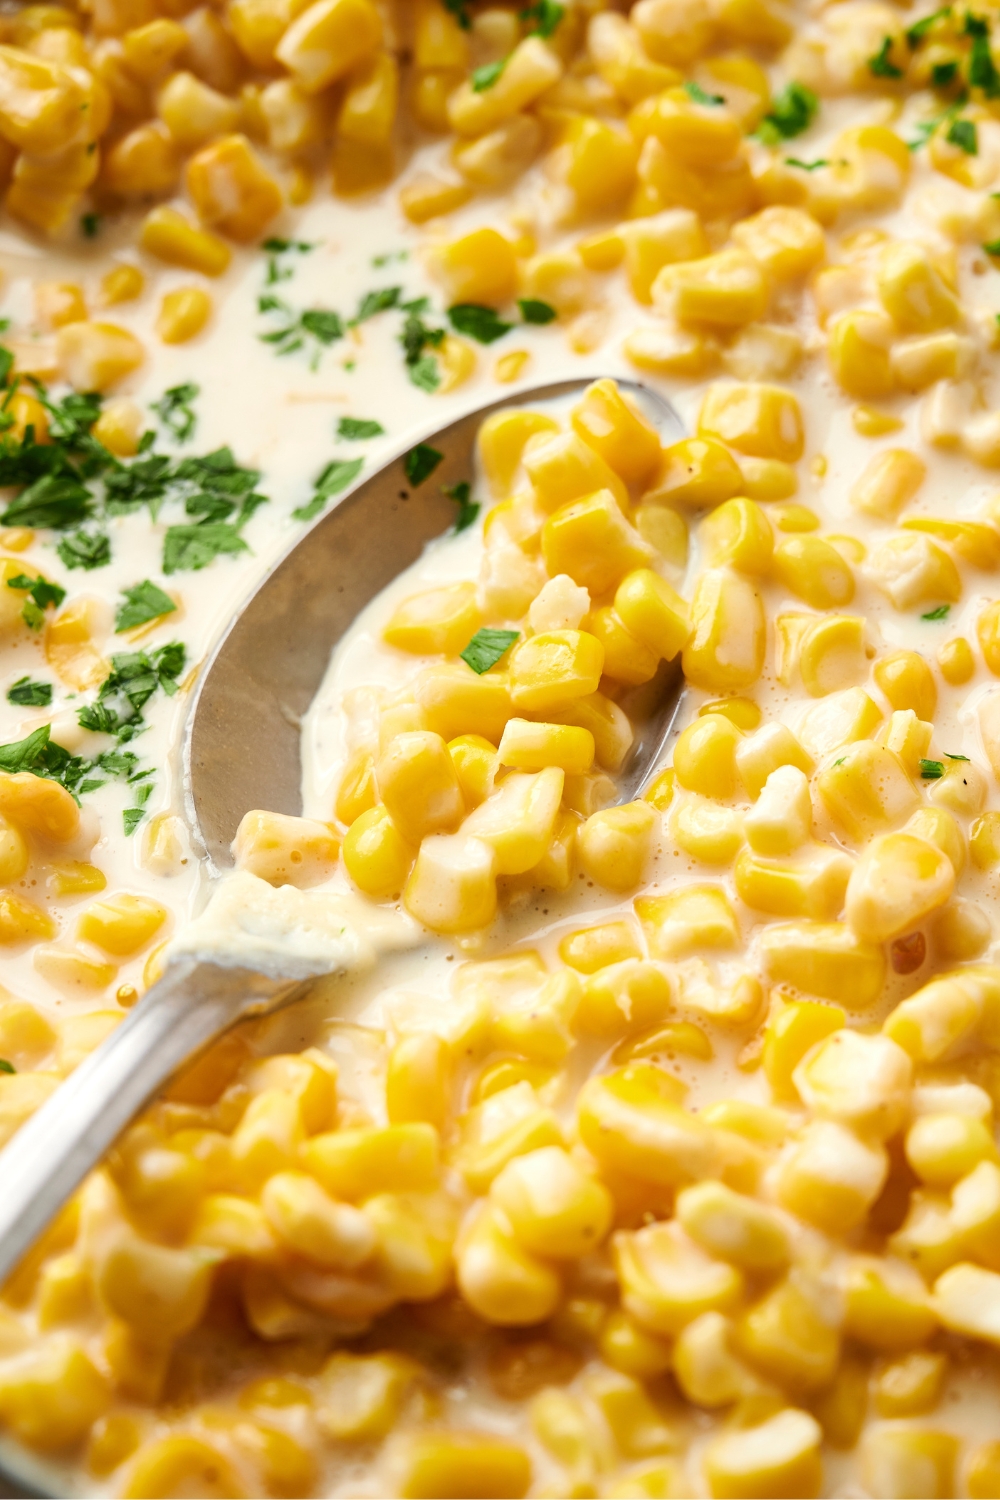 A silver spoon full of creamed corn garnished with fresh herbs.